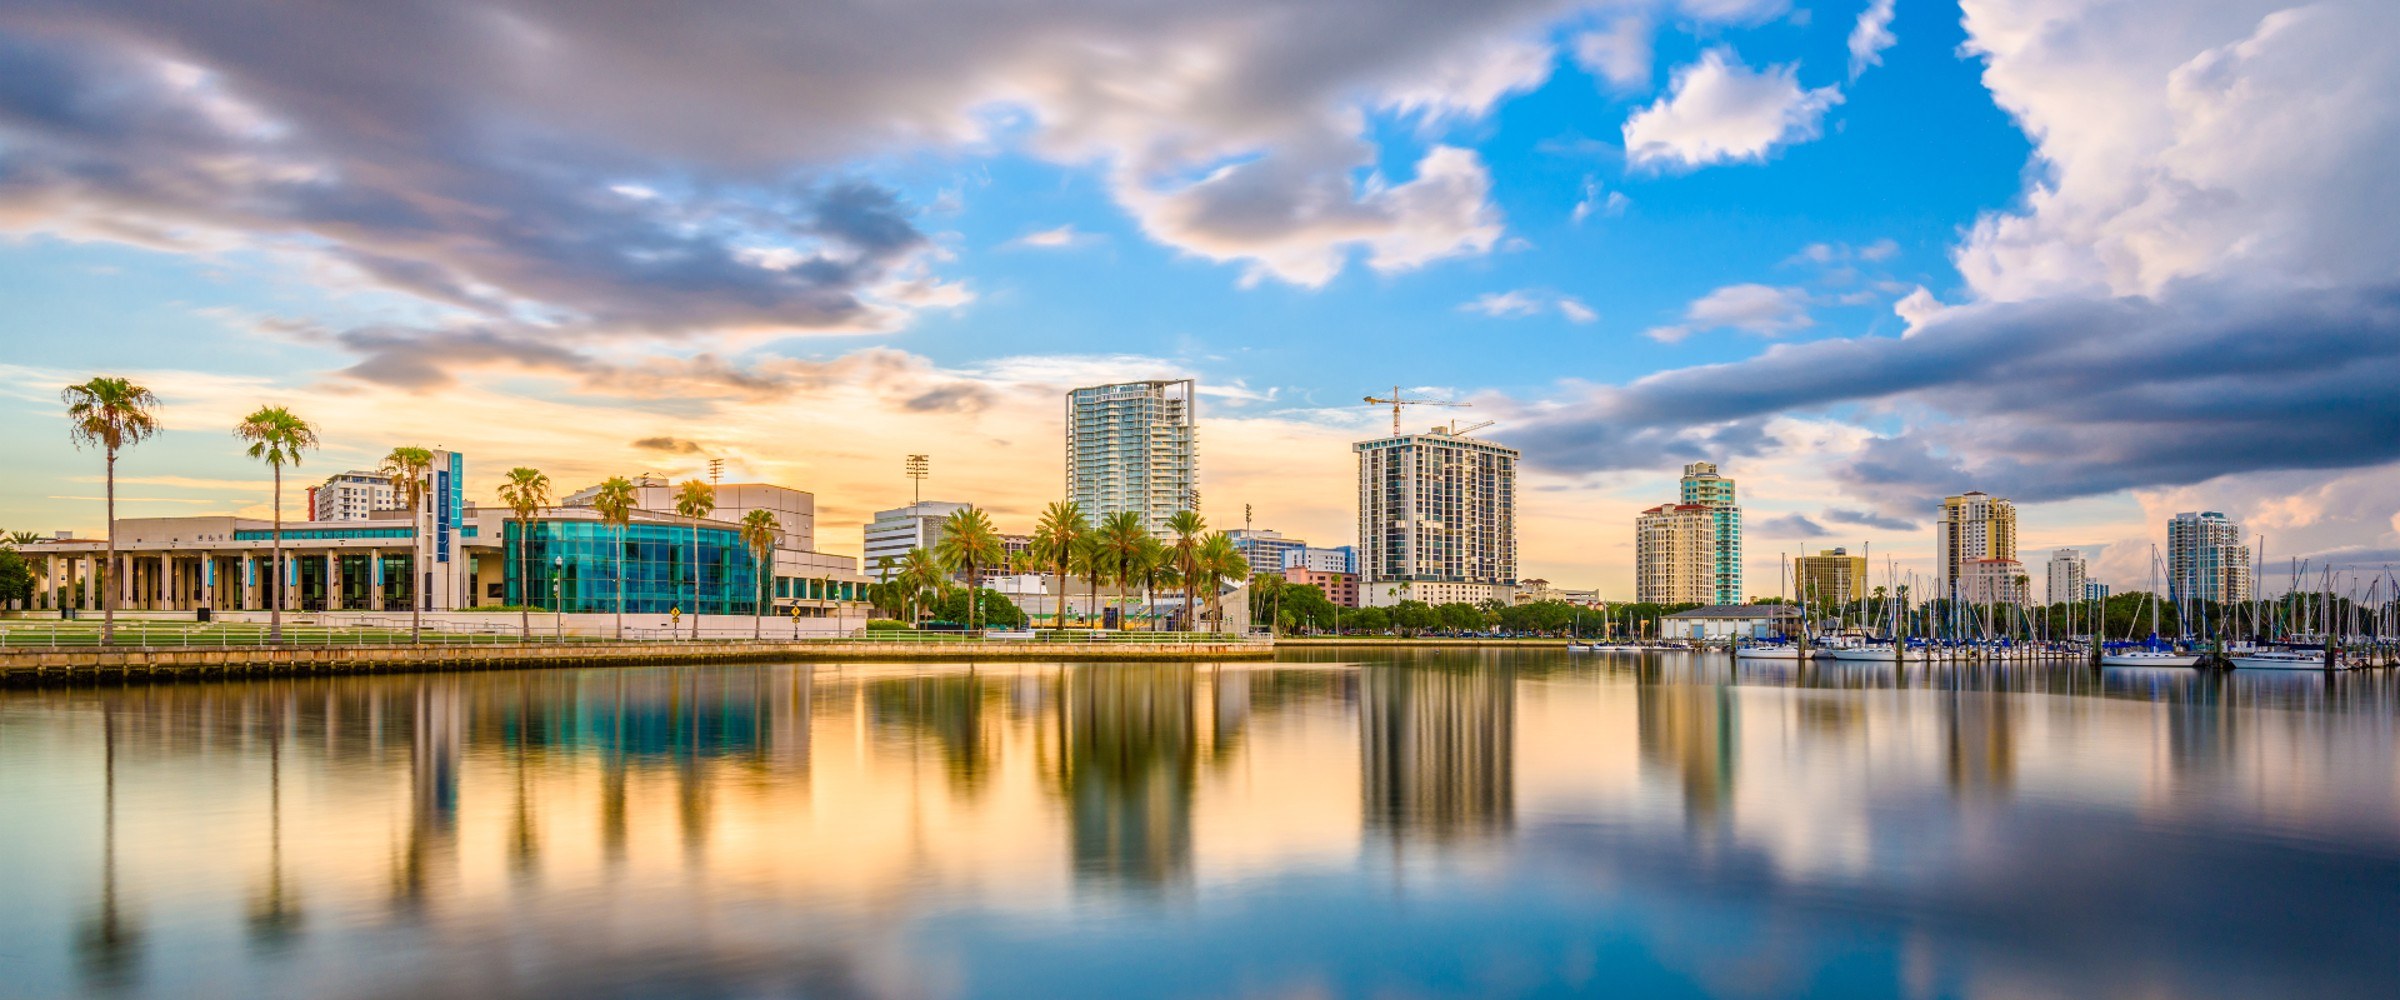 7 Things You Should Know Before Moving to St. Petersburg FL